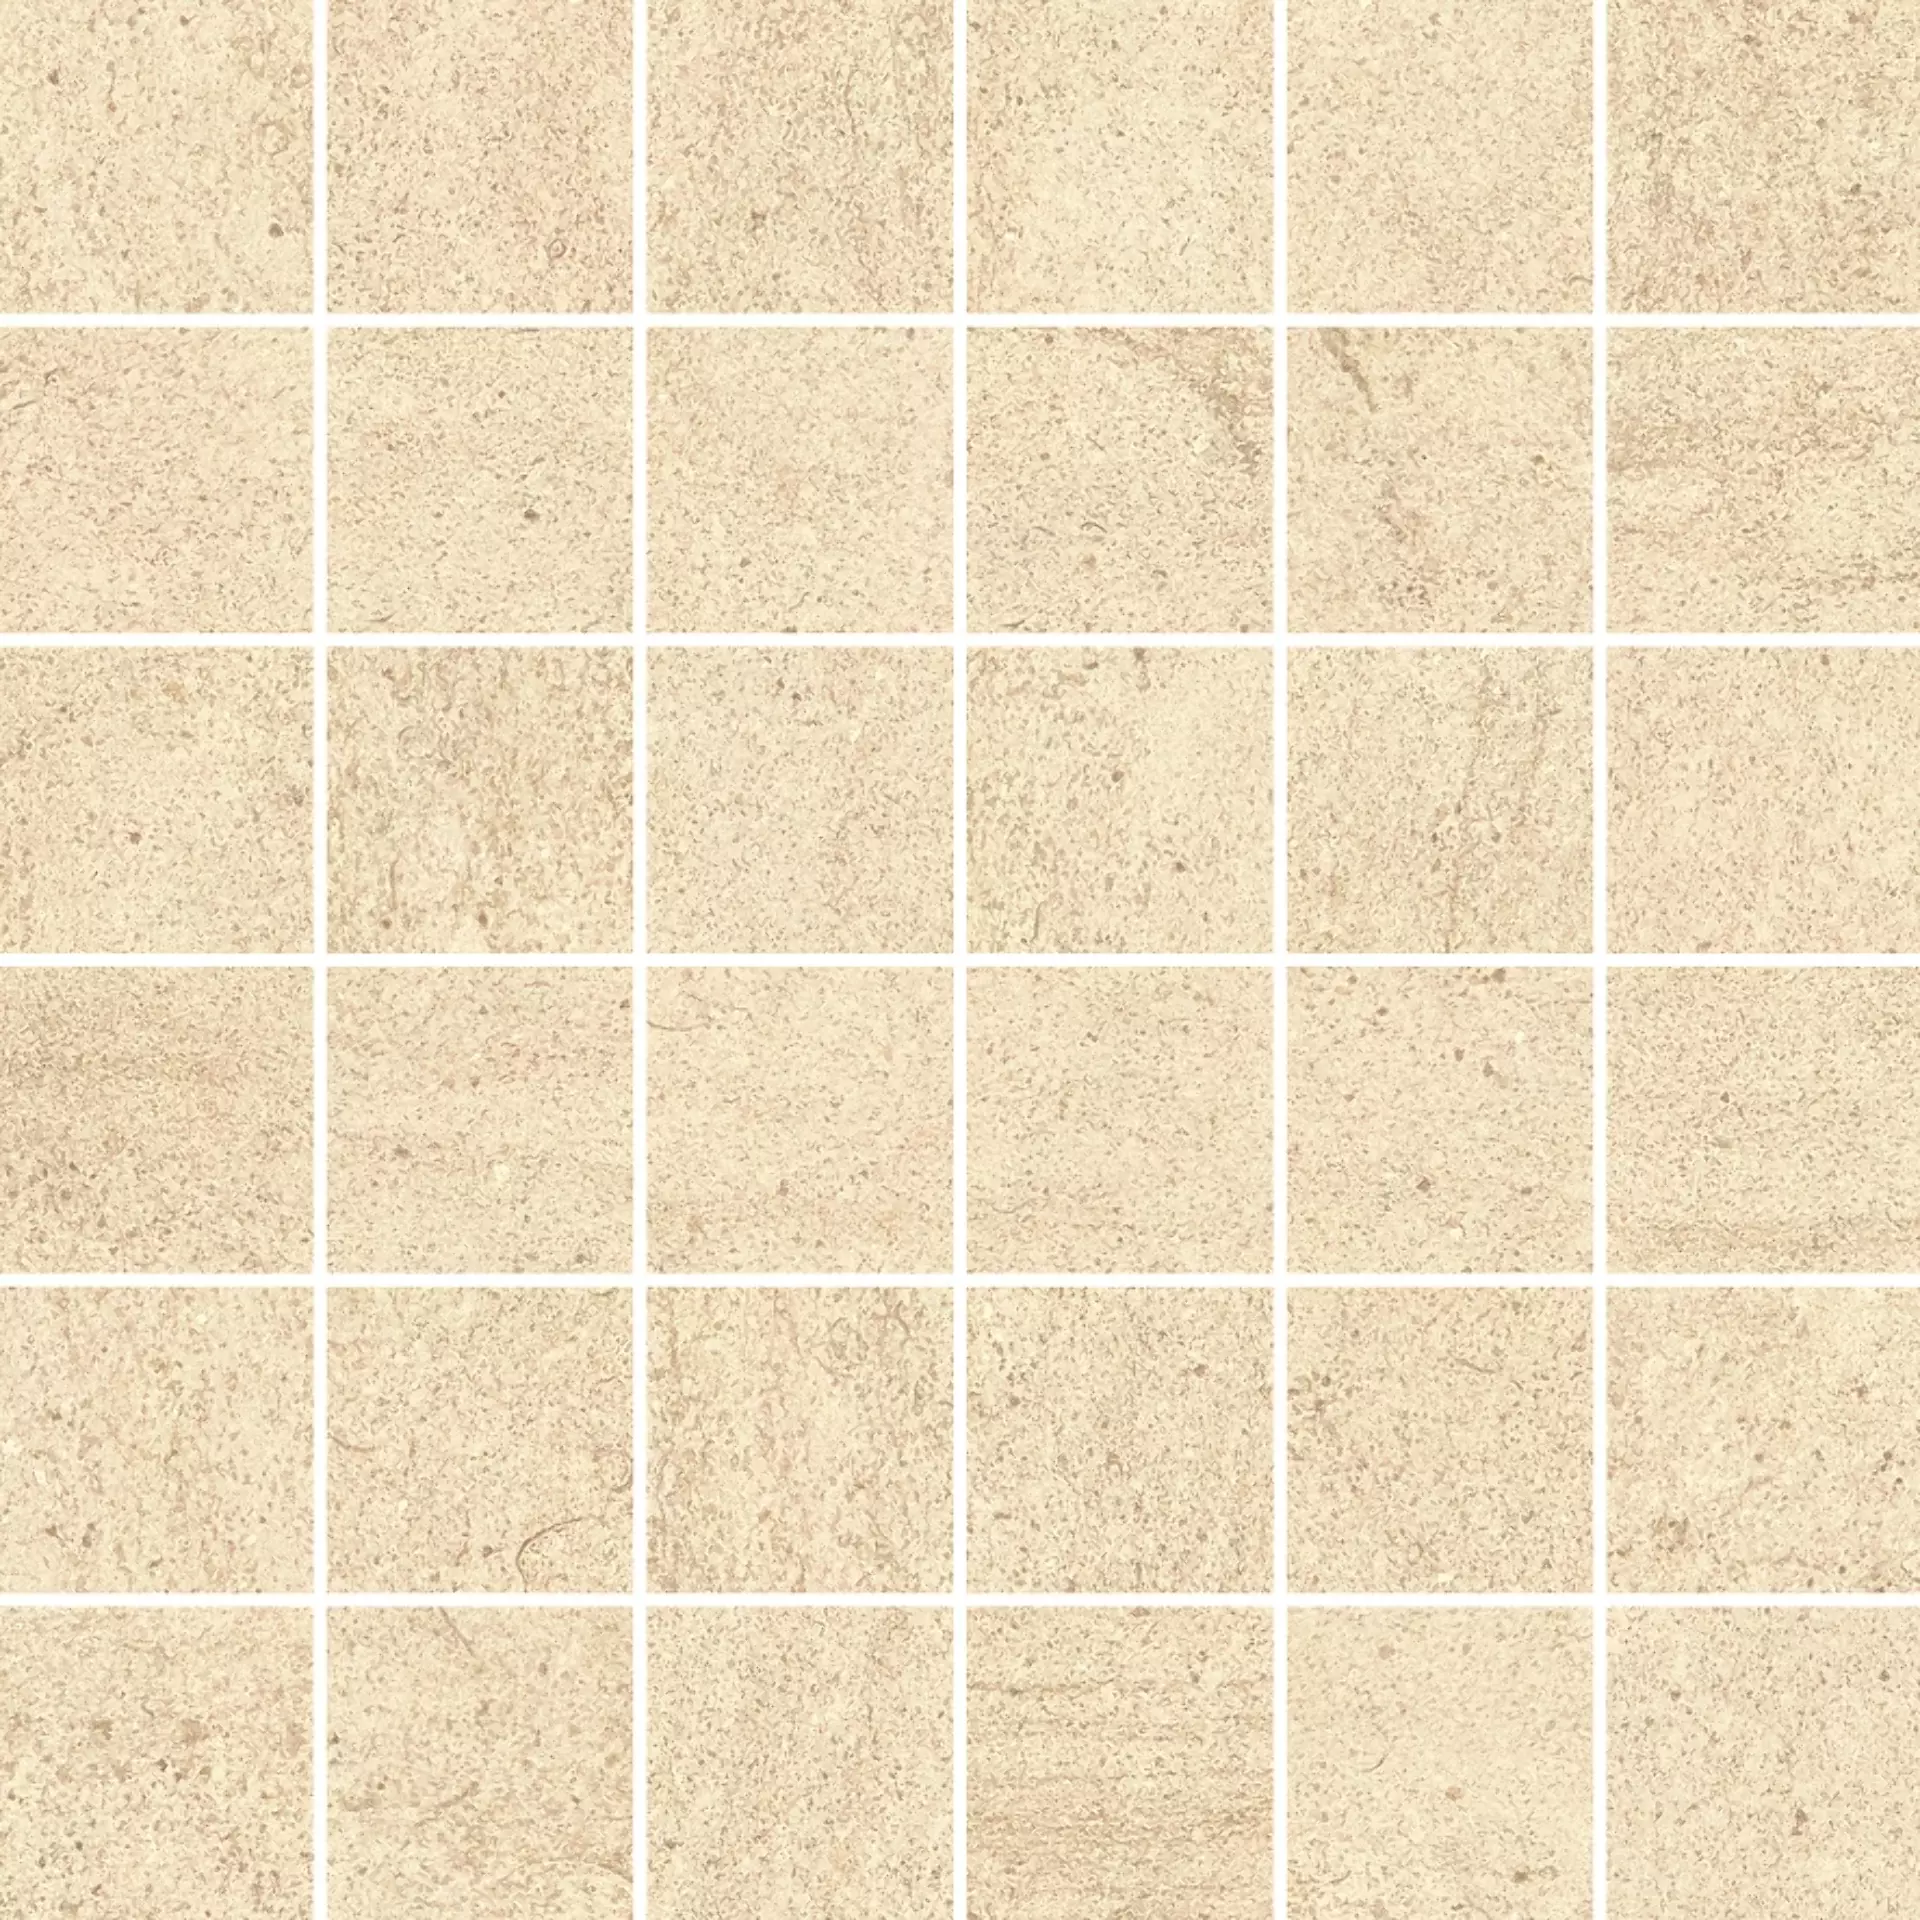 Margres Hybrid White Touch Mosaic 5x5 B25M33HB1T 30x30cm rectified 10,5mm